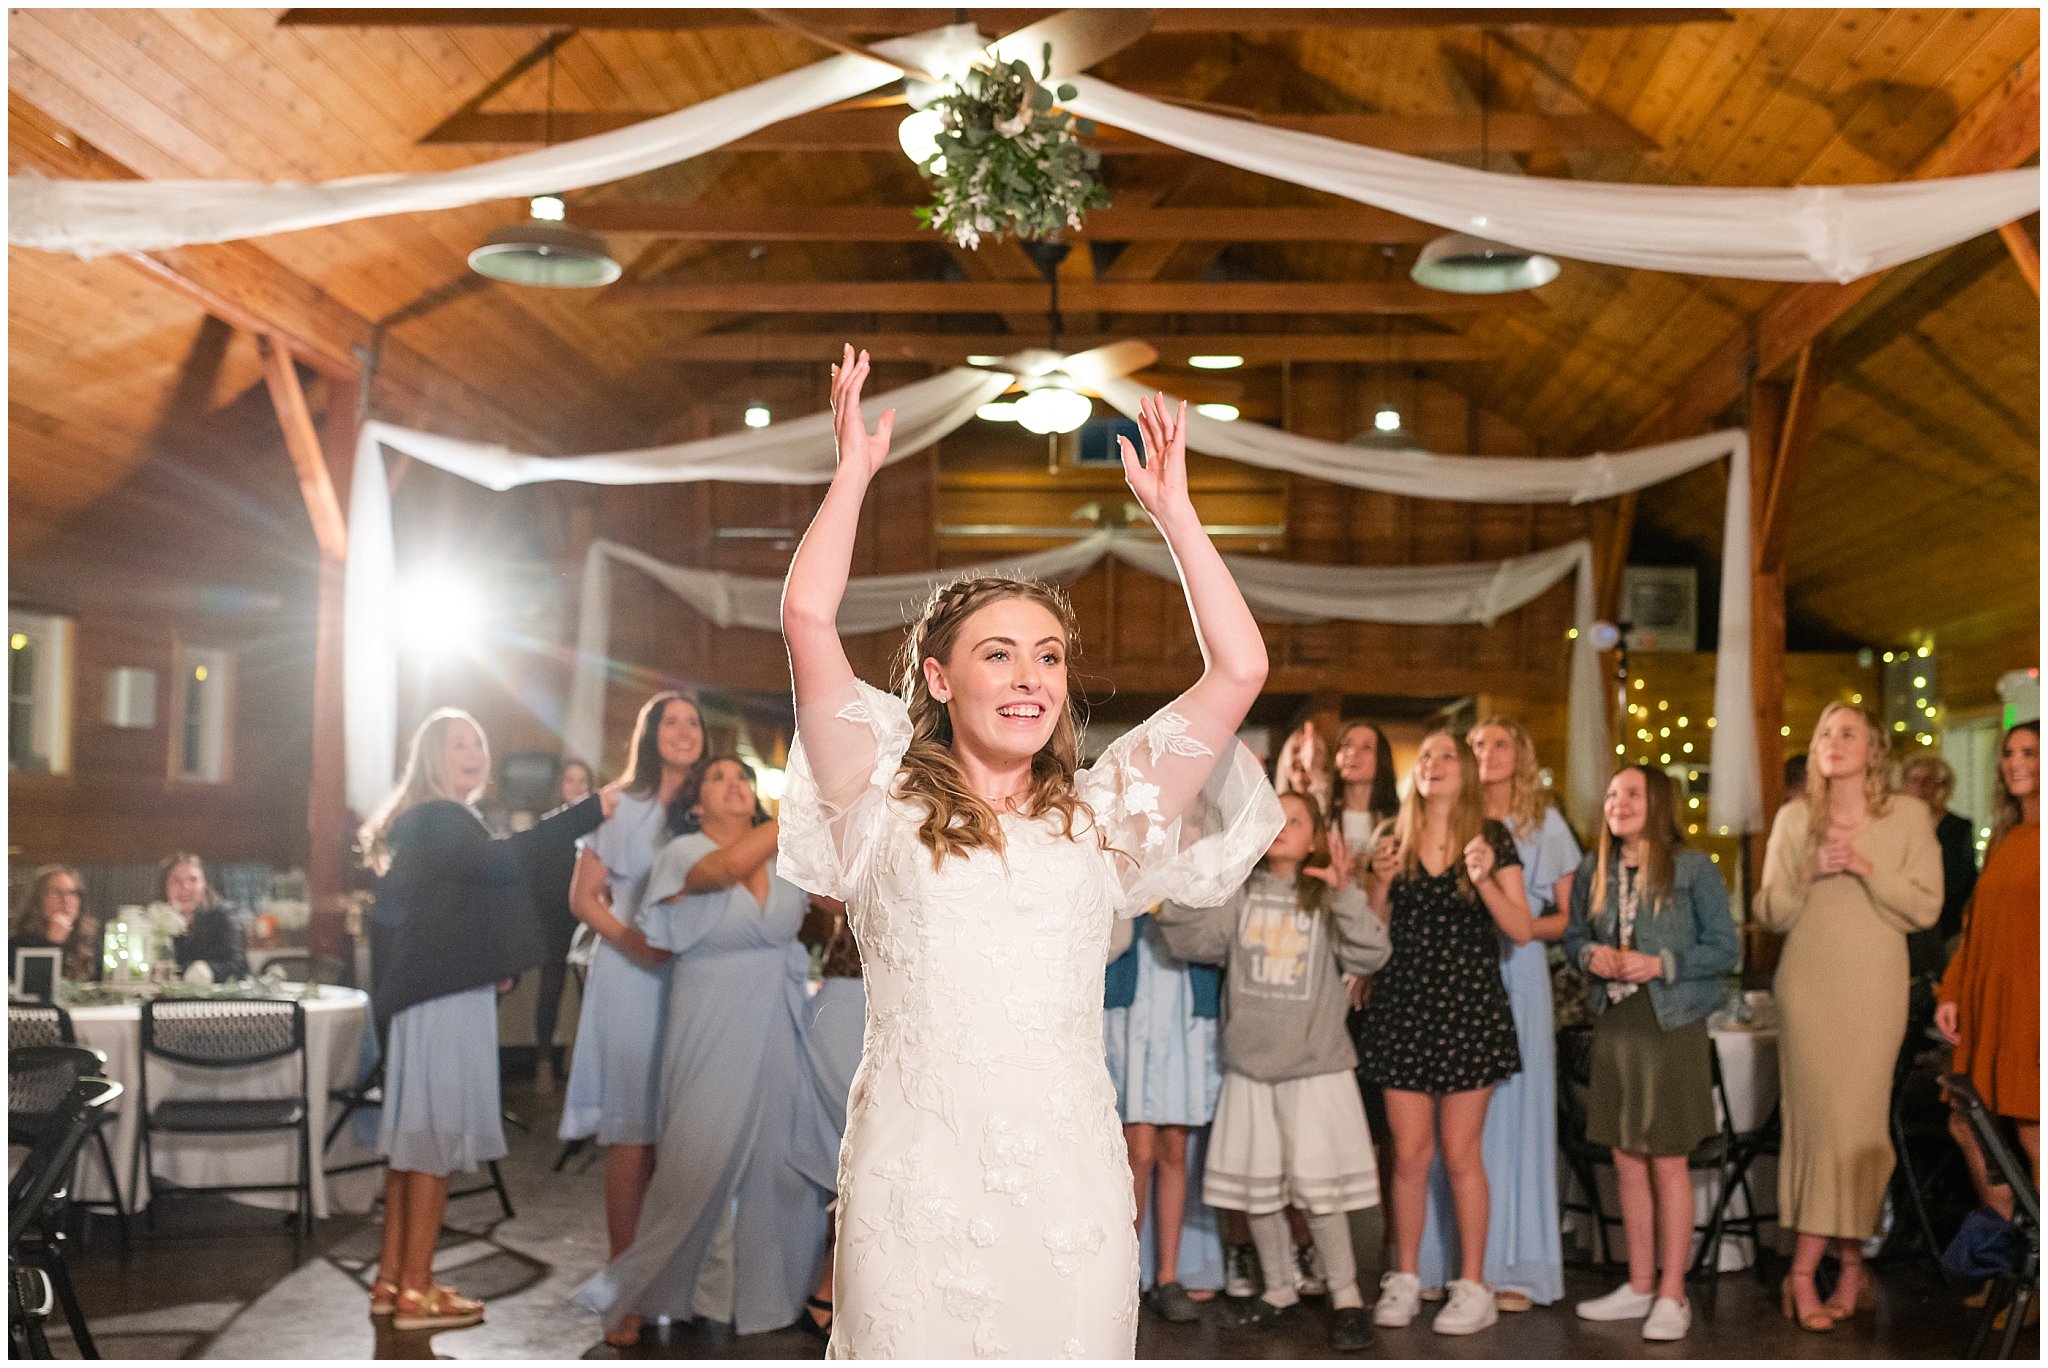 Bouquet toss at barn wedding | Oquirrh Mountain Temple and Draper Day Barn Winter Wedding | Jessie and Dallin Photography